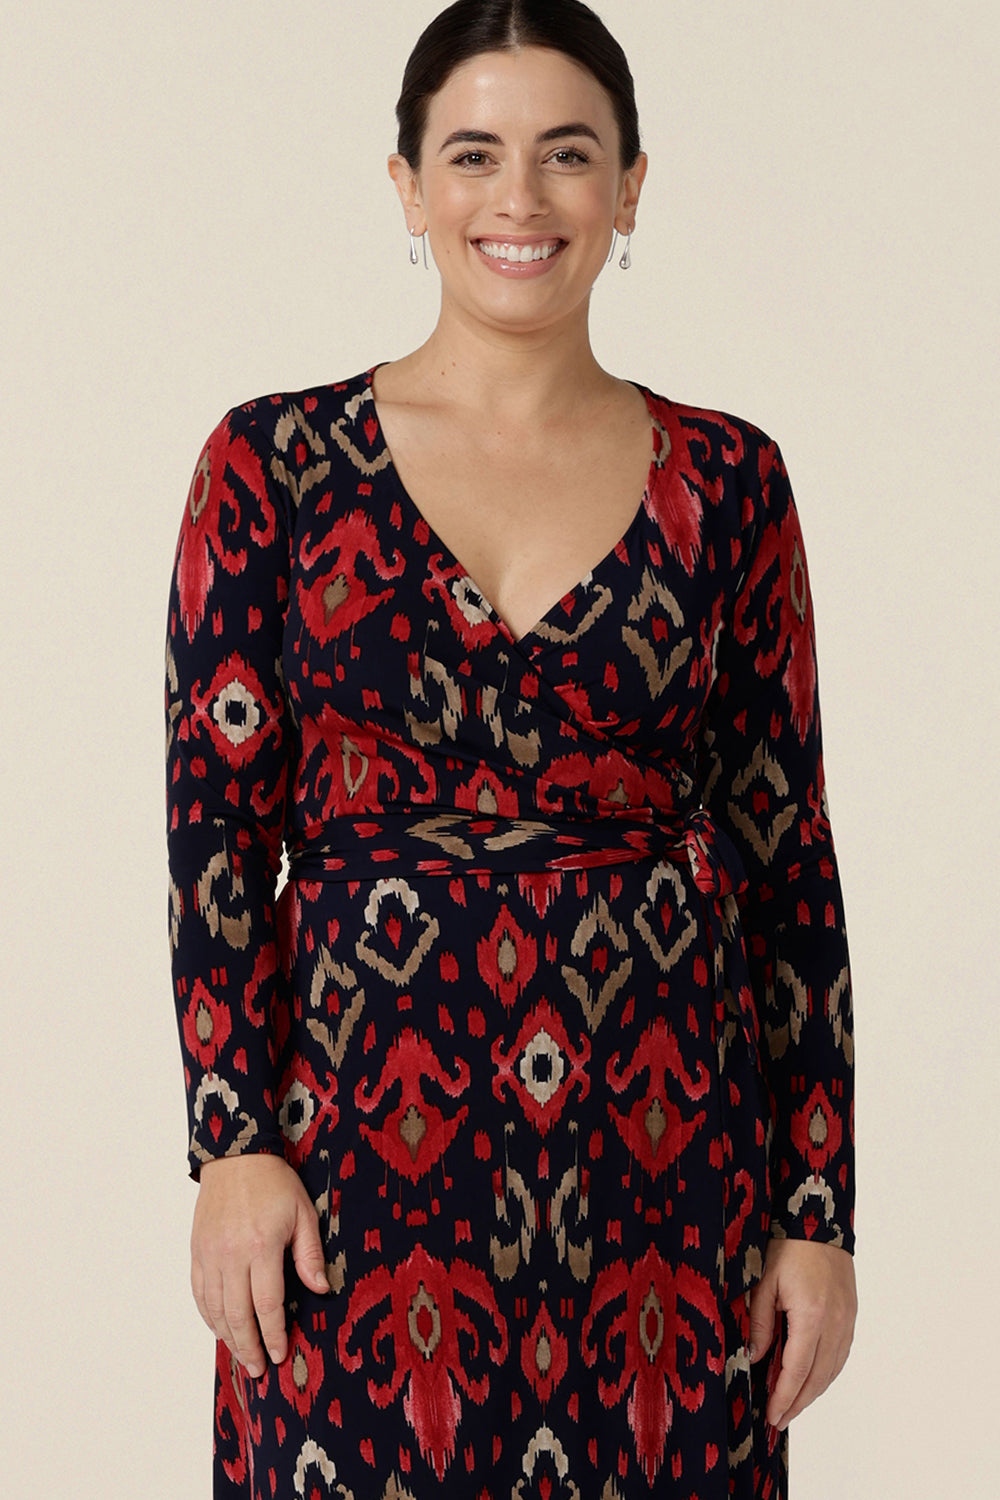 Close up an Australian-made maxi dress, the Kimberly Maxi Dress in Ikat is a full length jersey wrap dress with long sleeves. Shown on a size 10 woman, shop this maxi dress in an inclusive size range of sizes 8 to 24.